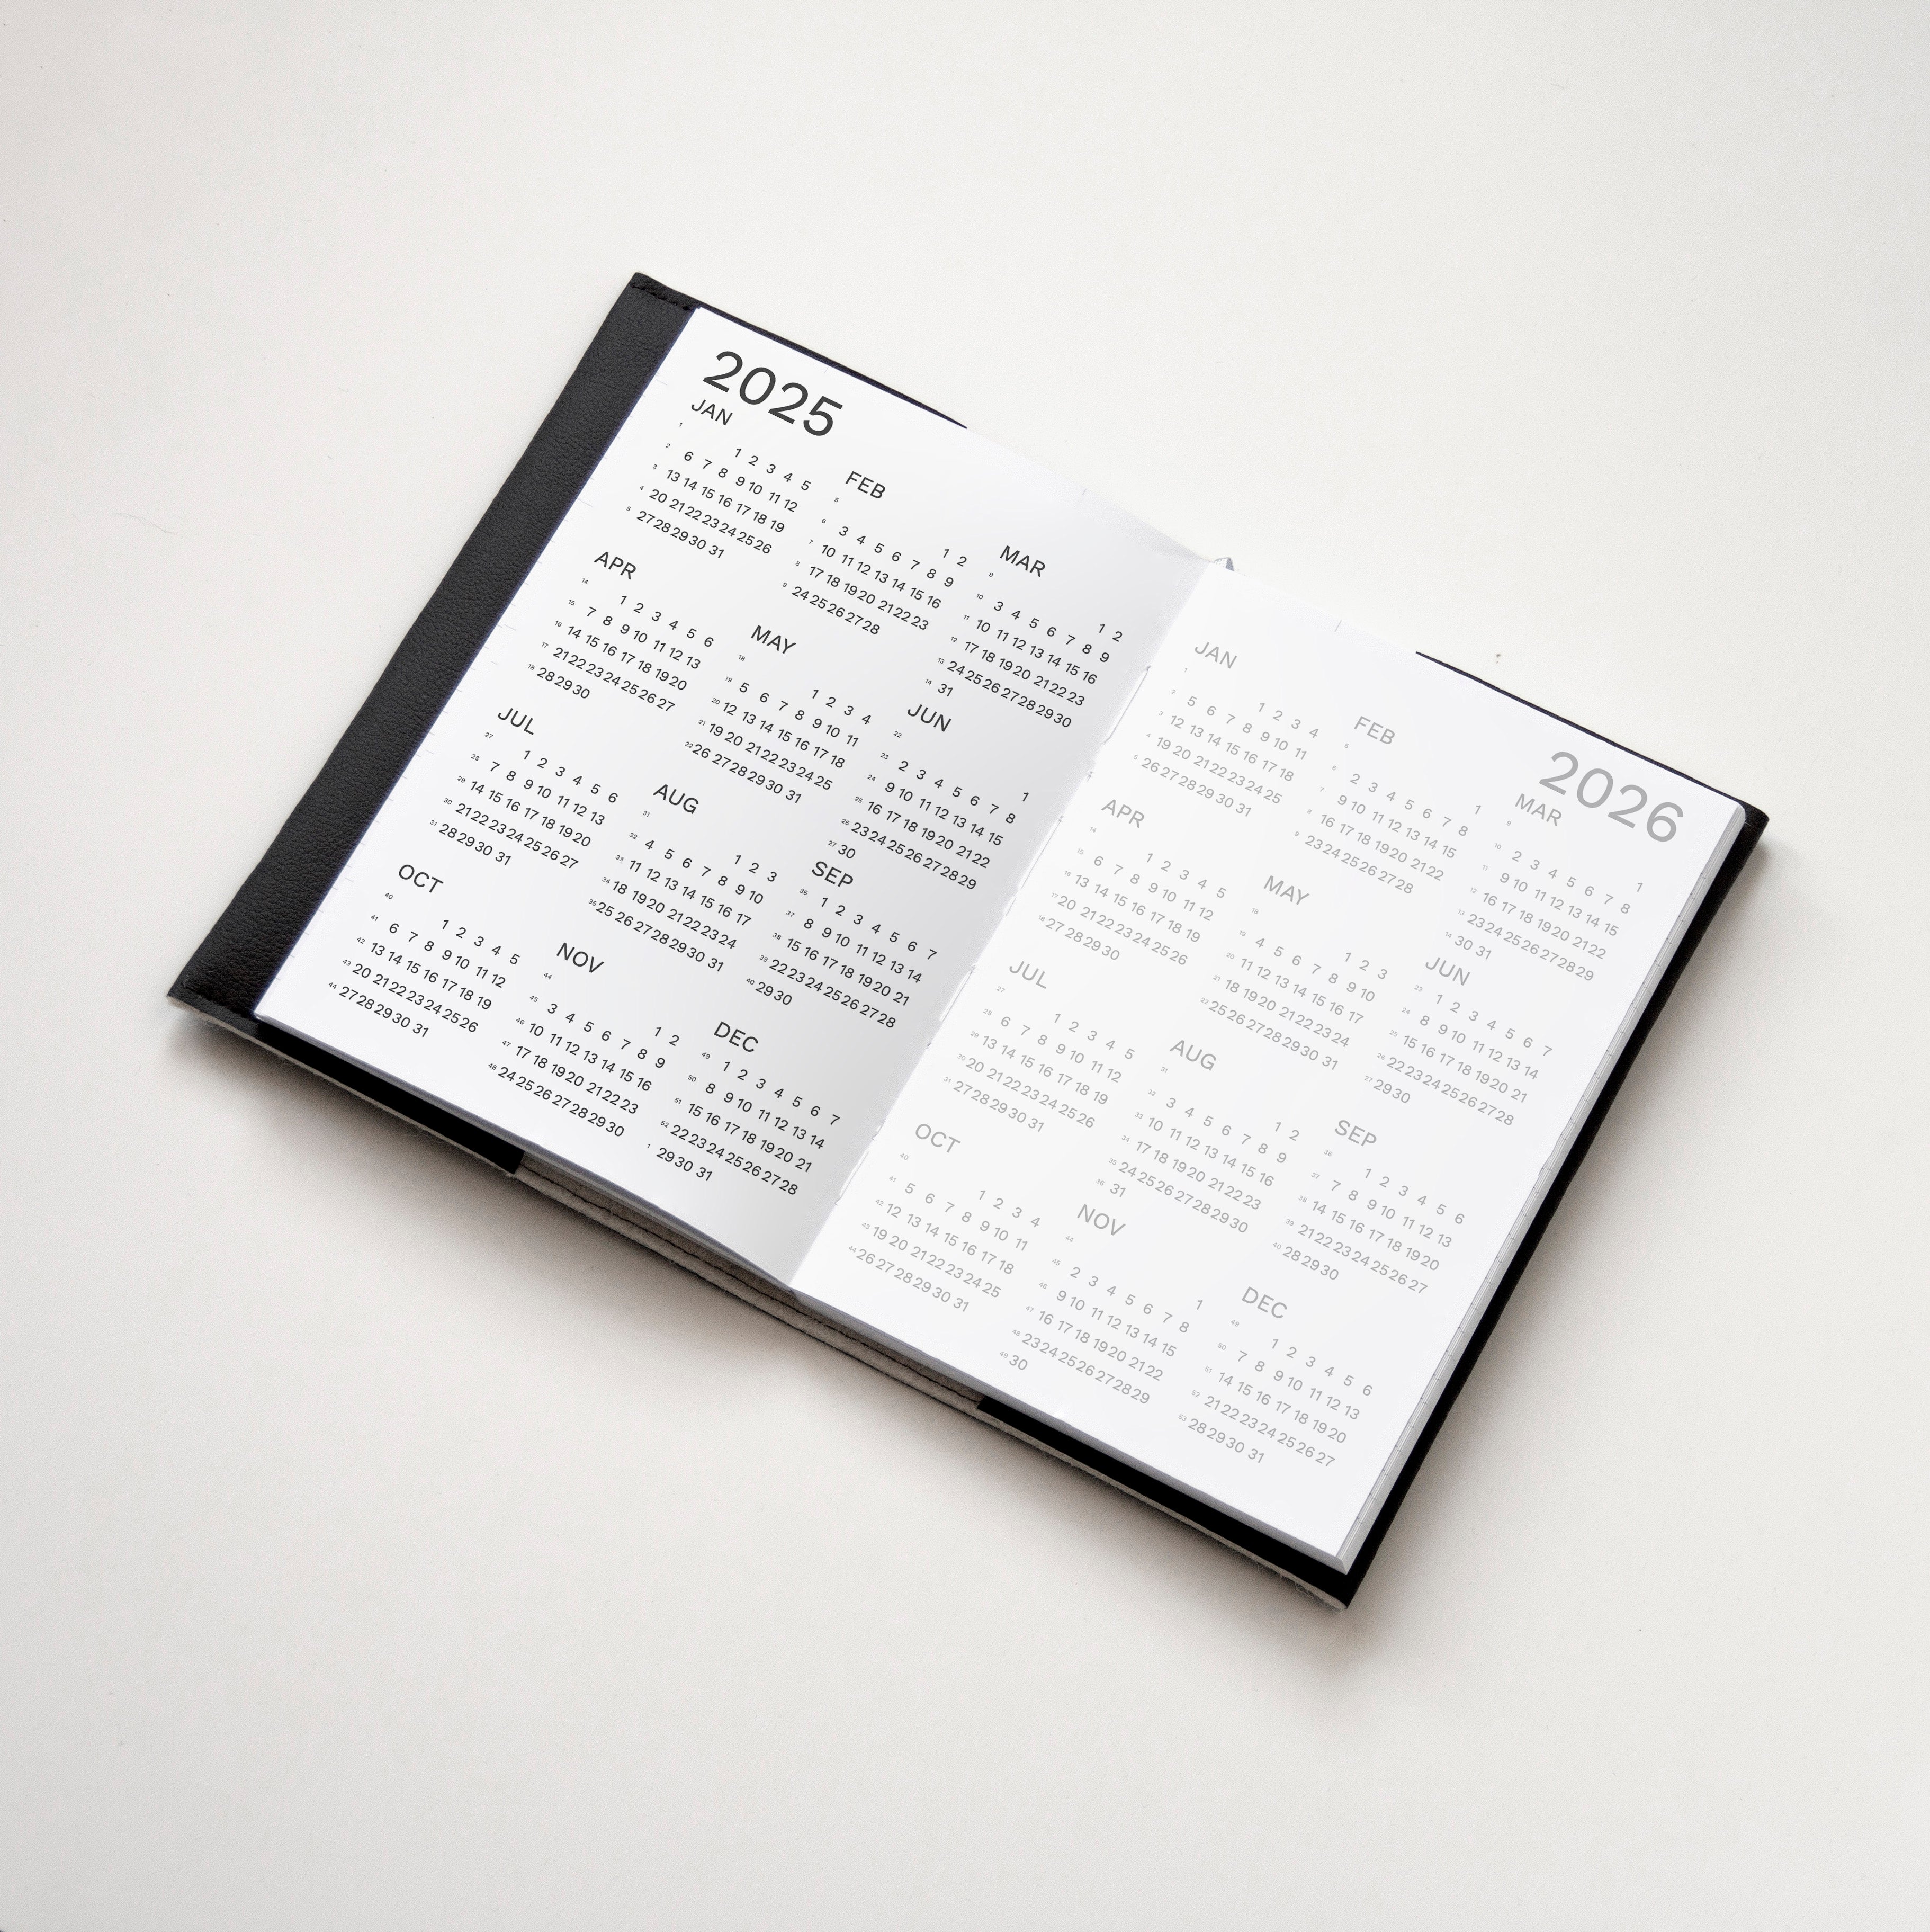 Octàgon Design 2025 PRO Weekly Planner, 2025 and 2026 calendars